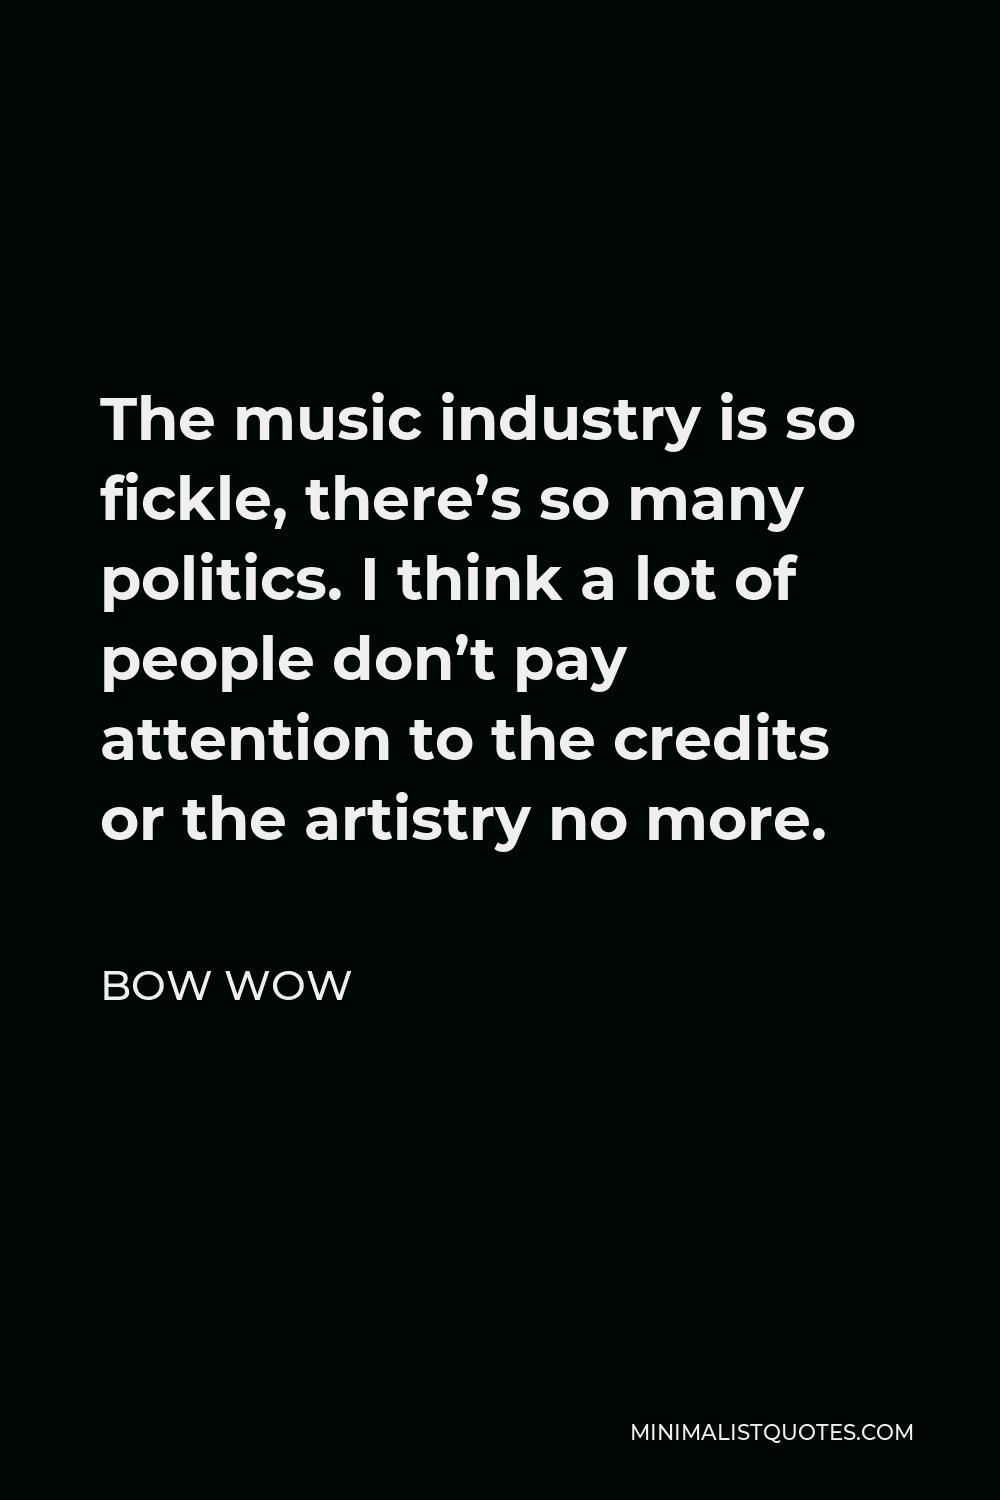 Bow Wow Quote - The music industry is so fickle, there’s so many politics. I think a lot of people don’t pay attention to the credits or the artistry no more.